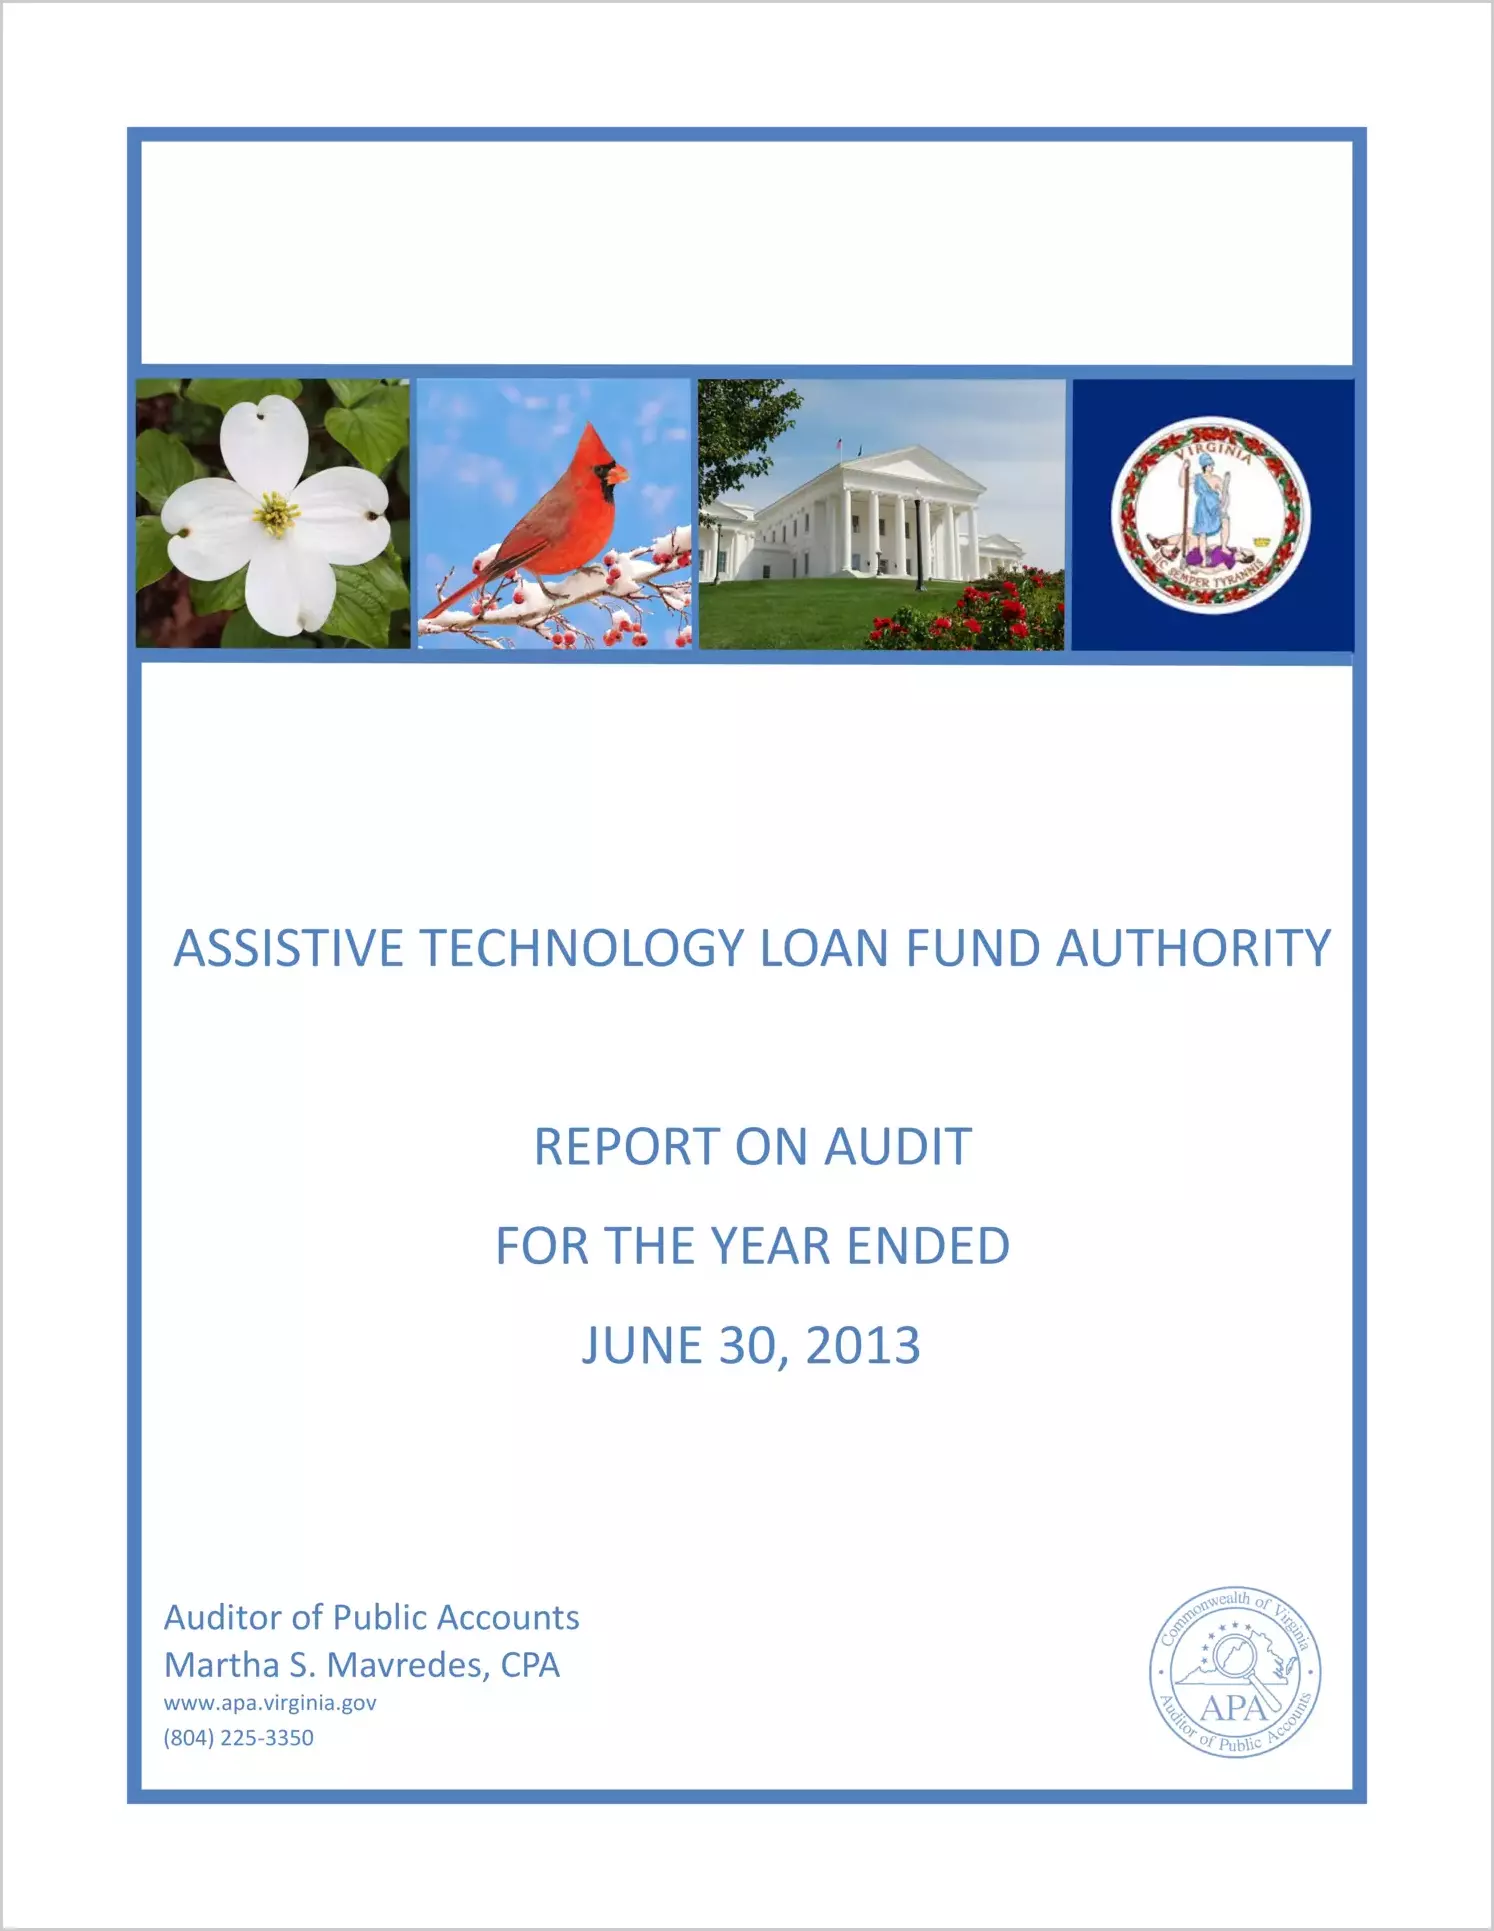 Assistive Technology Loan Fund Authority report on audit for the year ended June 30, 2013